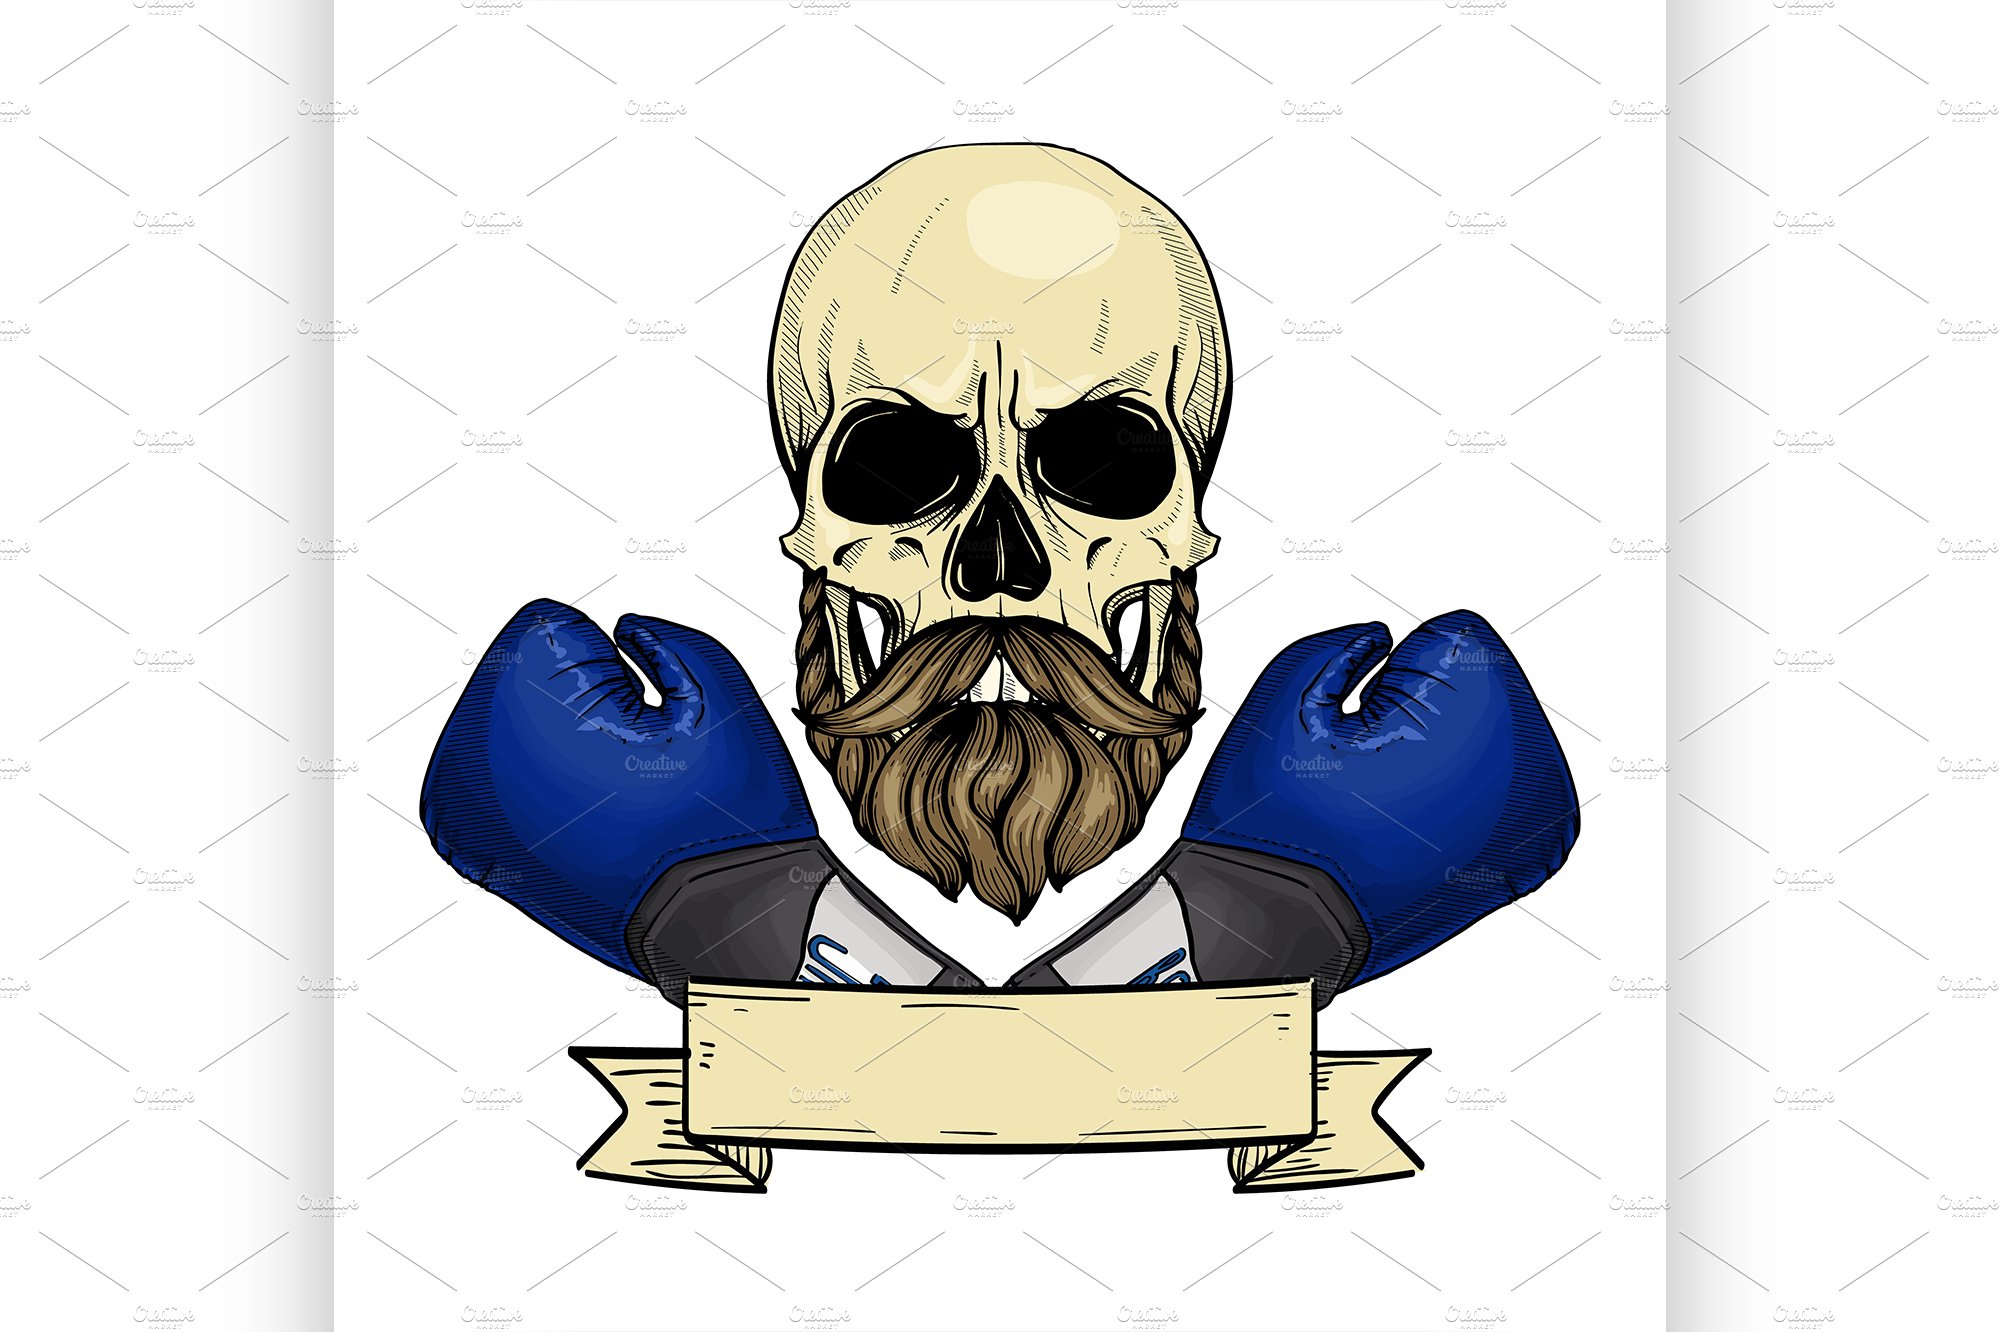 Color angry skull with boxing gloves cover image.